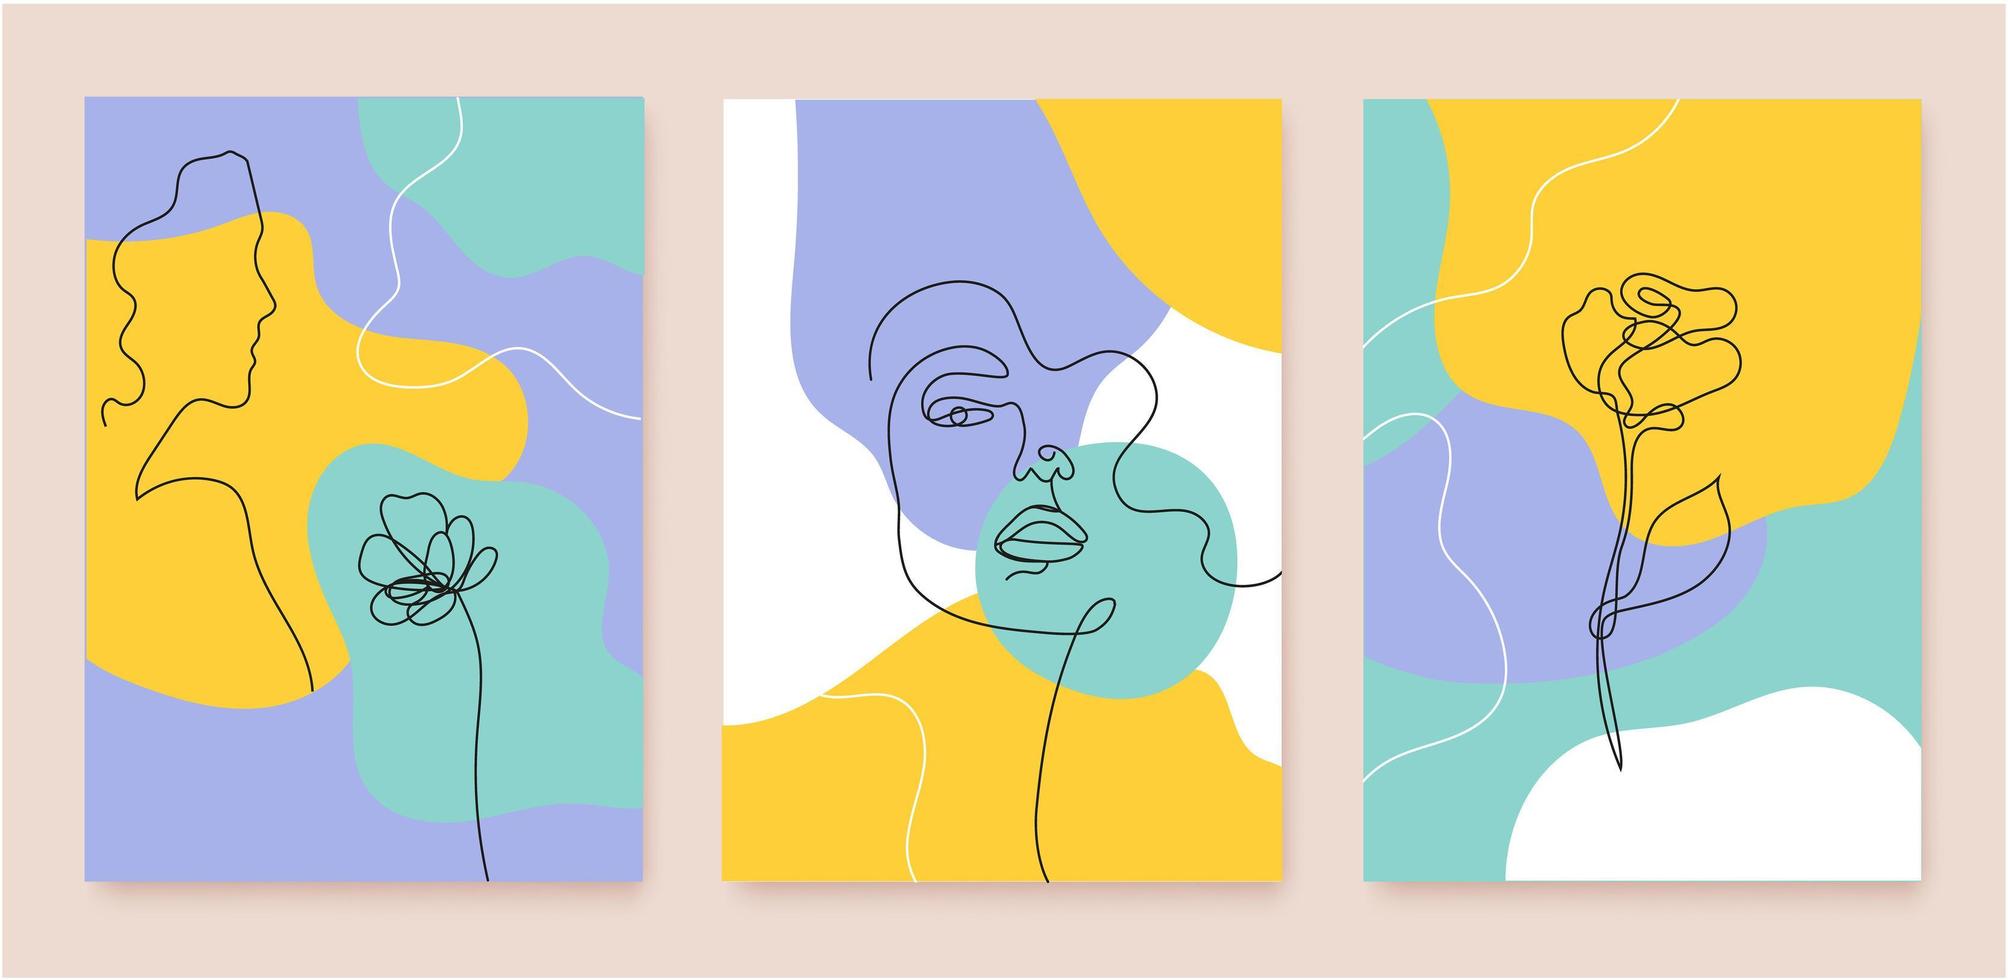 Vector set of abstract beauty and fashion linear covers, posters, banners, flyers with linear continuous line woman portrait, flowers. Art, illustration with wavy flow background.